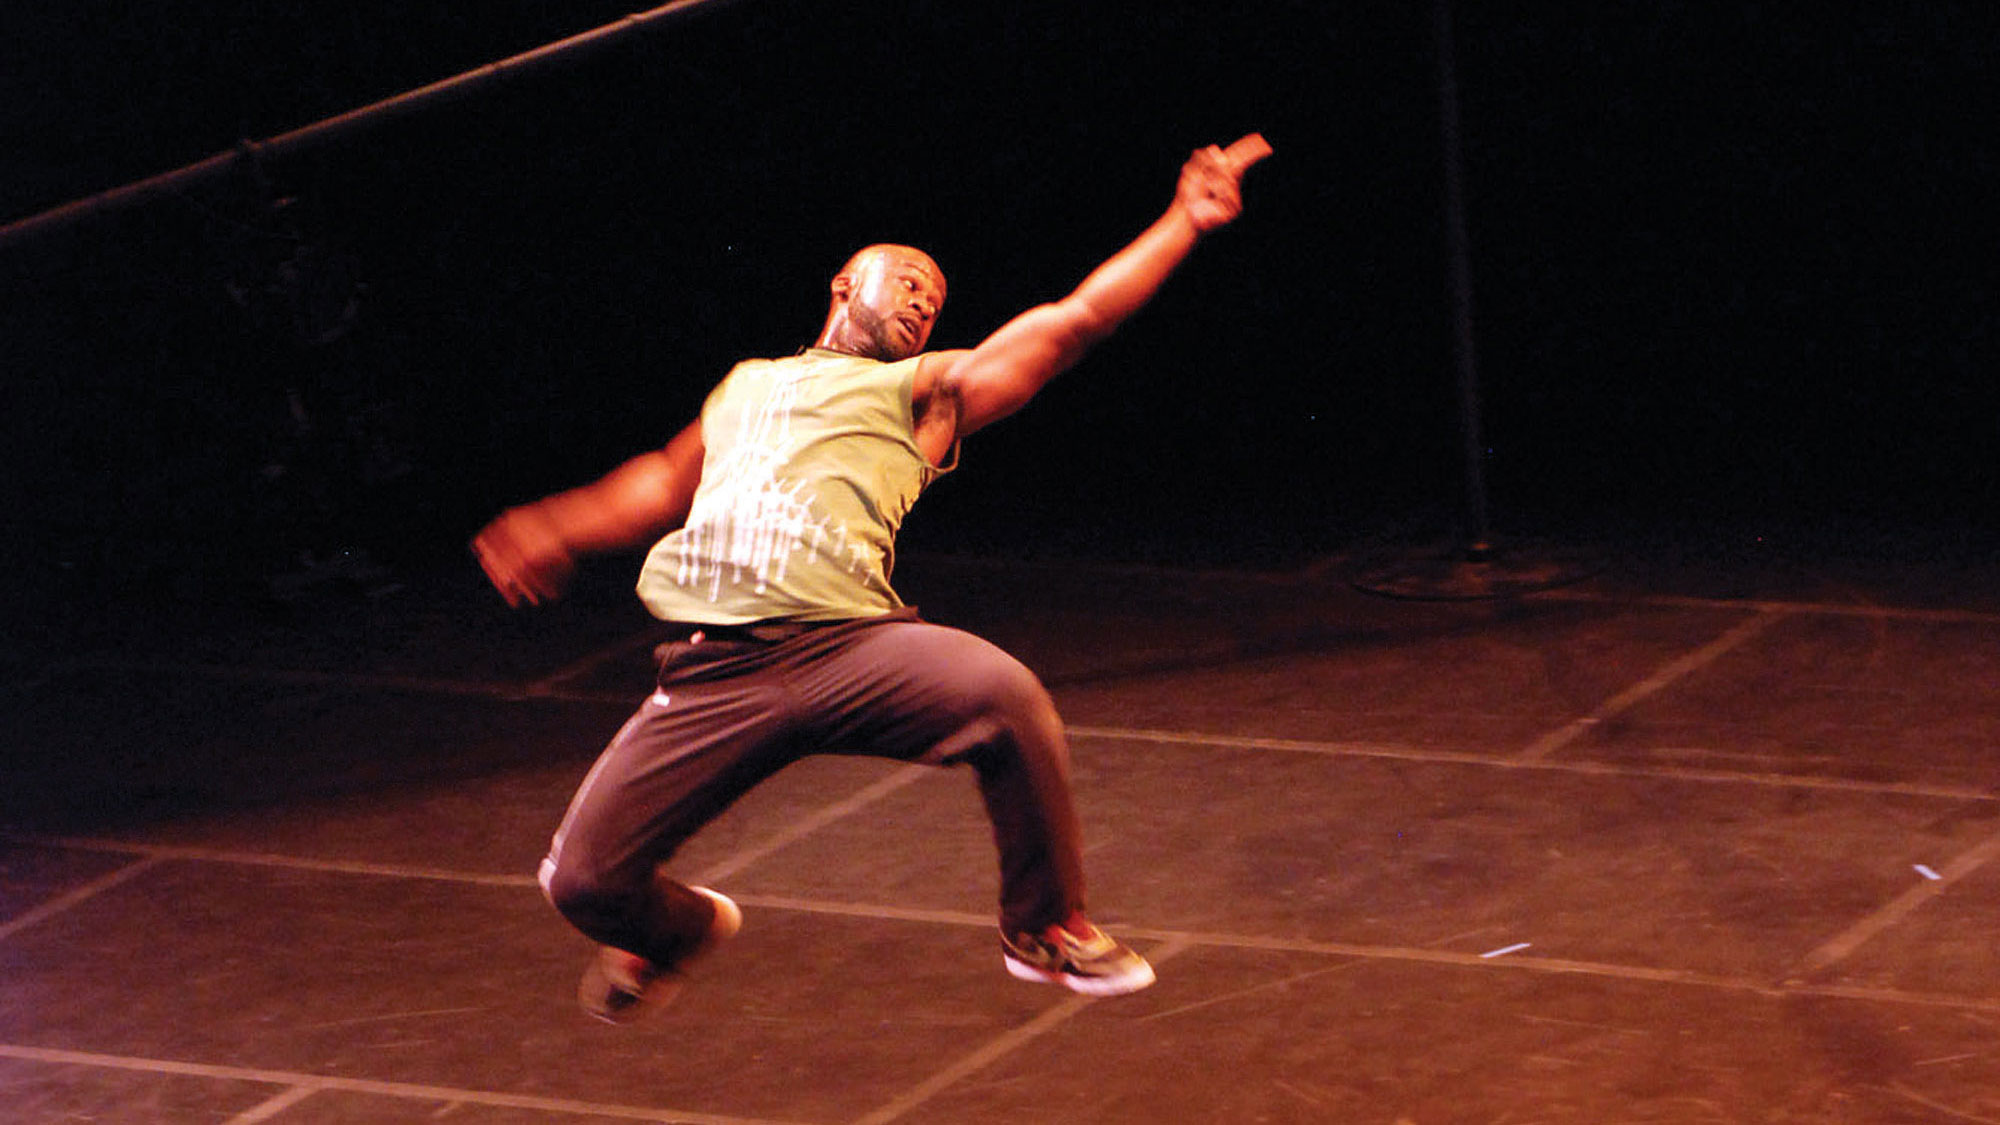 A bald Black man wearing a green tank top and gray pants leaping through the air with back arched and finger pointed I the air. 